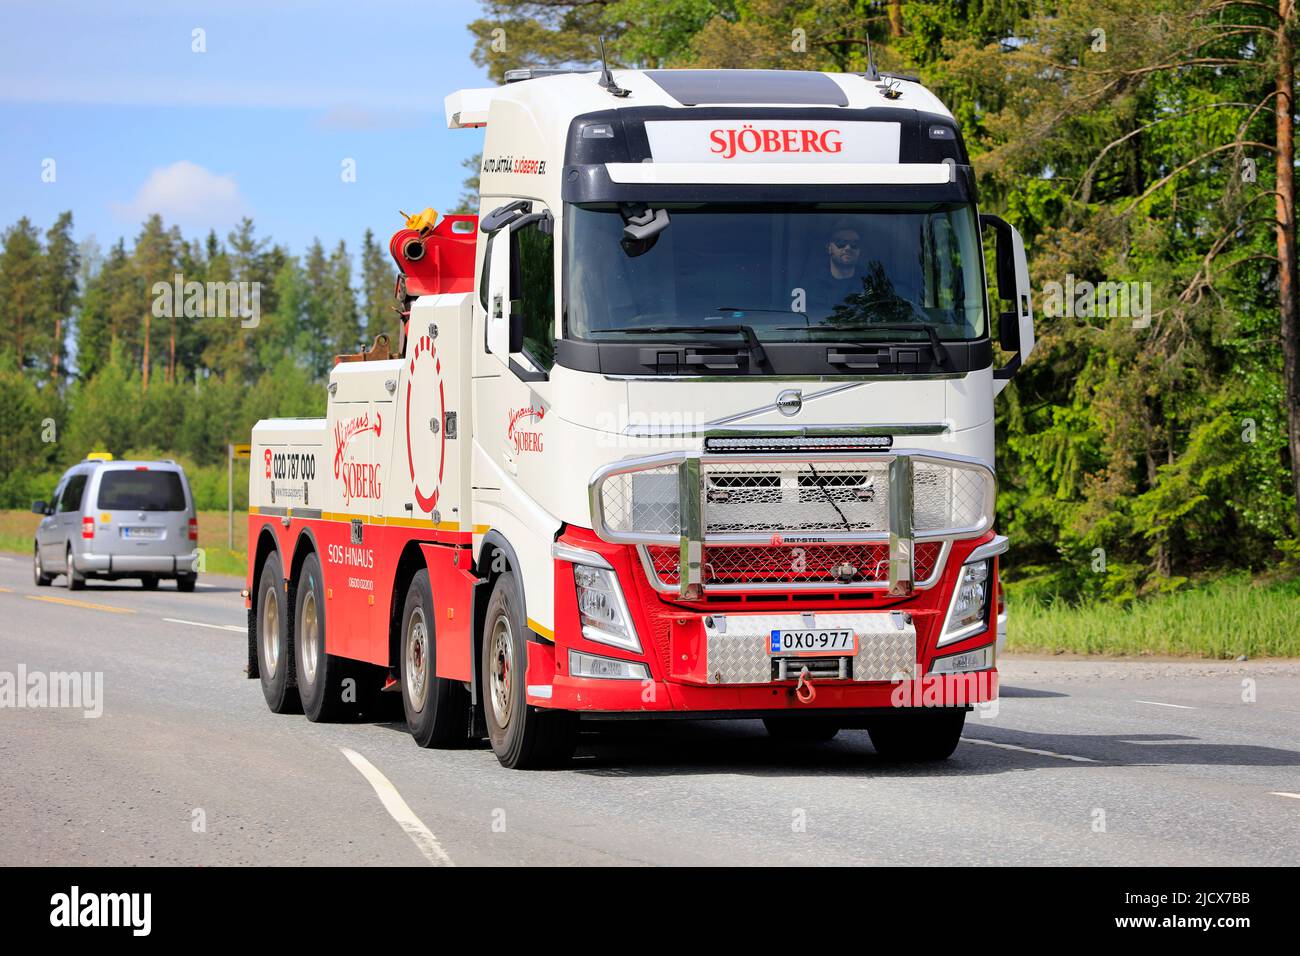 Volvo FH heavy duty recovery vehicle Hinaus Sjöberg Oy for towing semi trucks on Highway 2 traffic in the summer. Jokioinen, Finland. June 10, 2022. Stock Photo